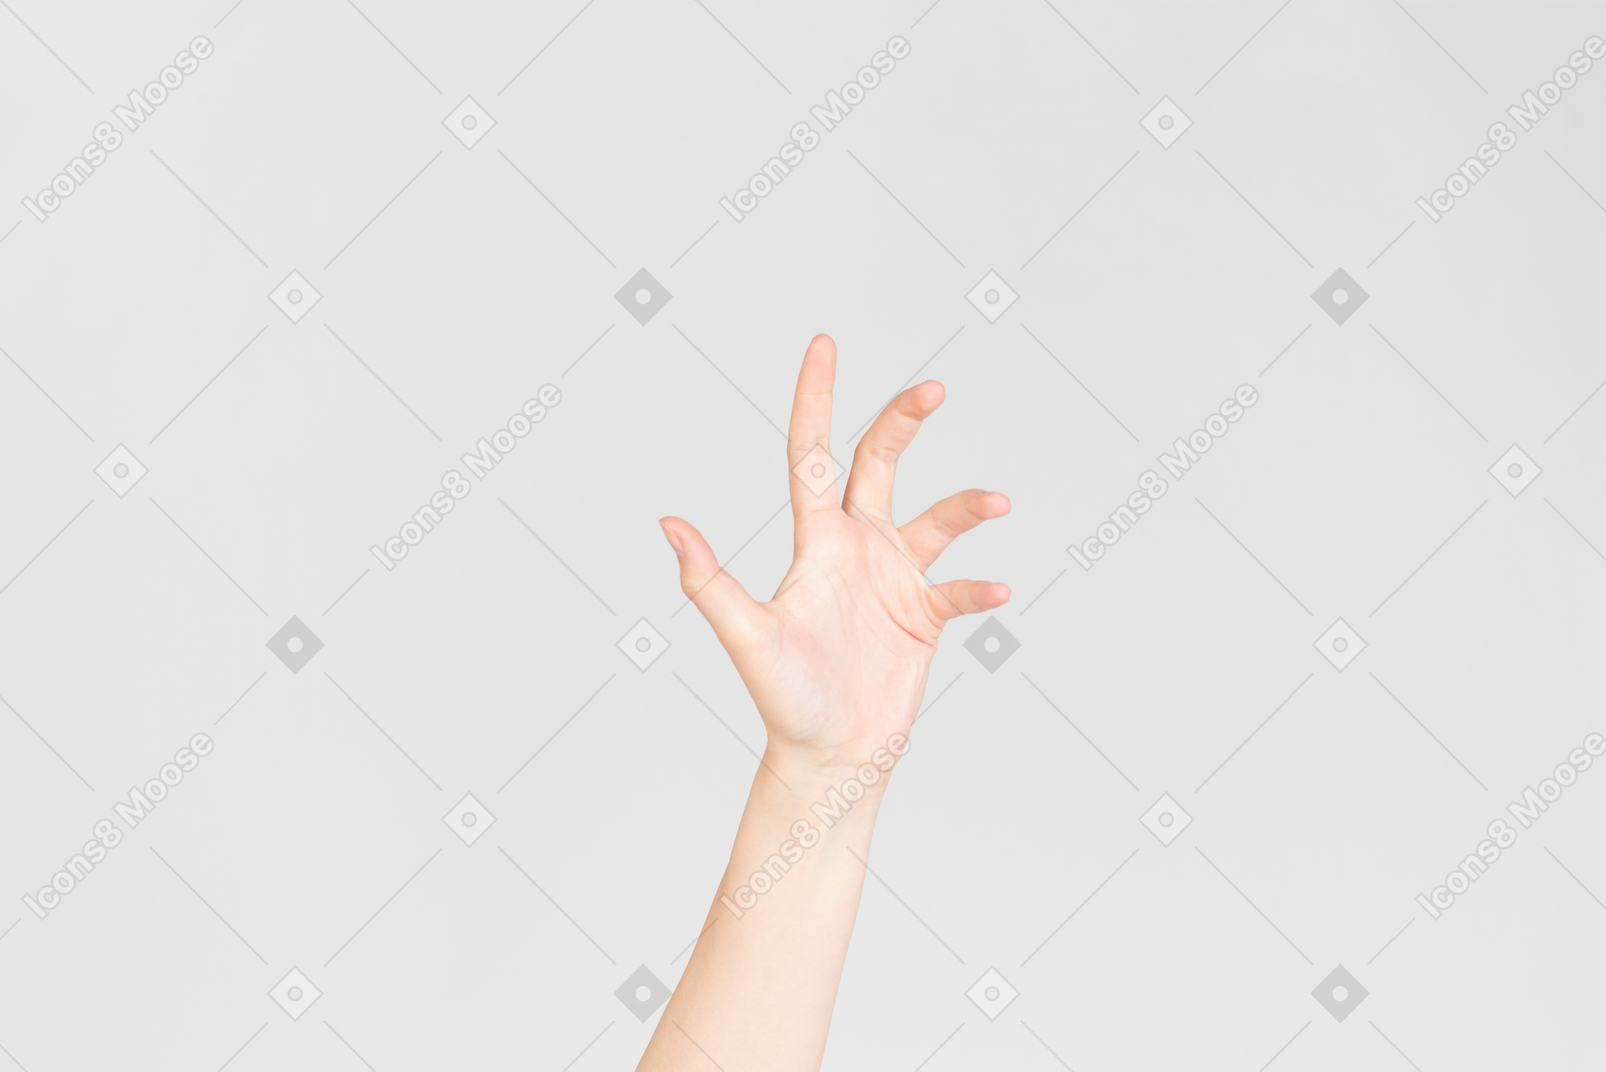 Female hand showing kind of scary gesture